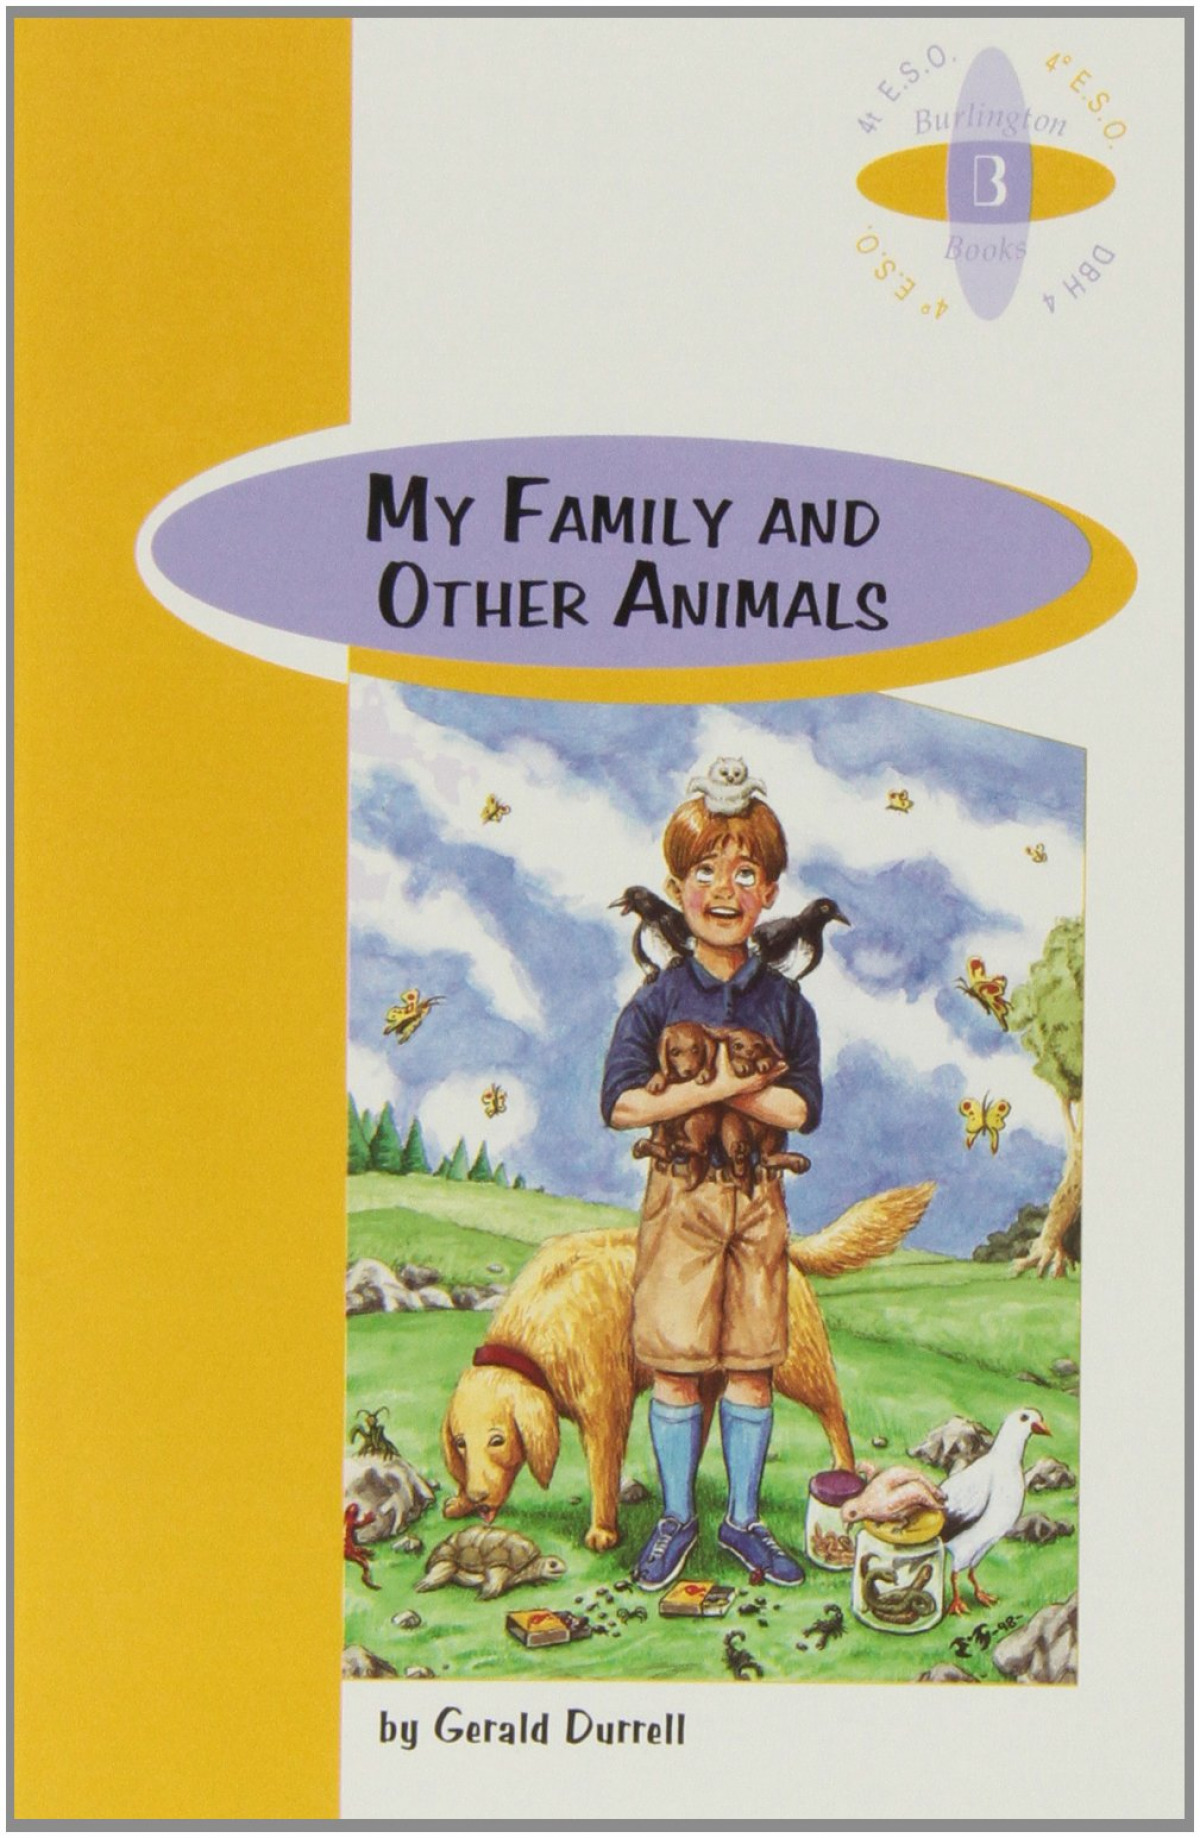 My family and other animals - Durrell, Gerald